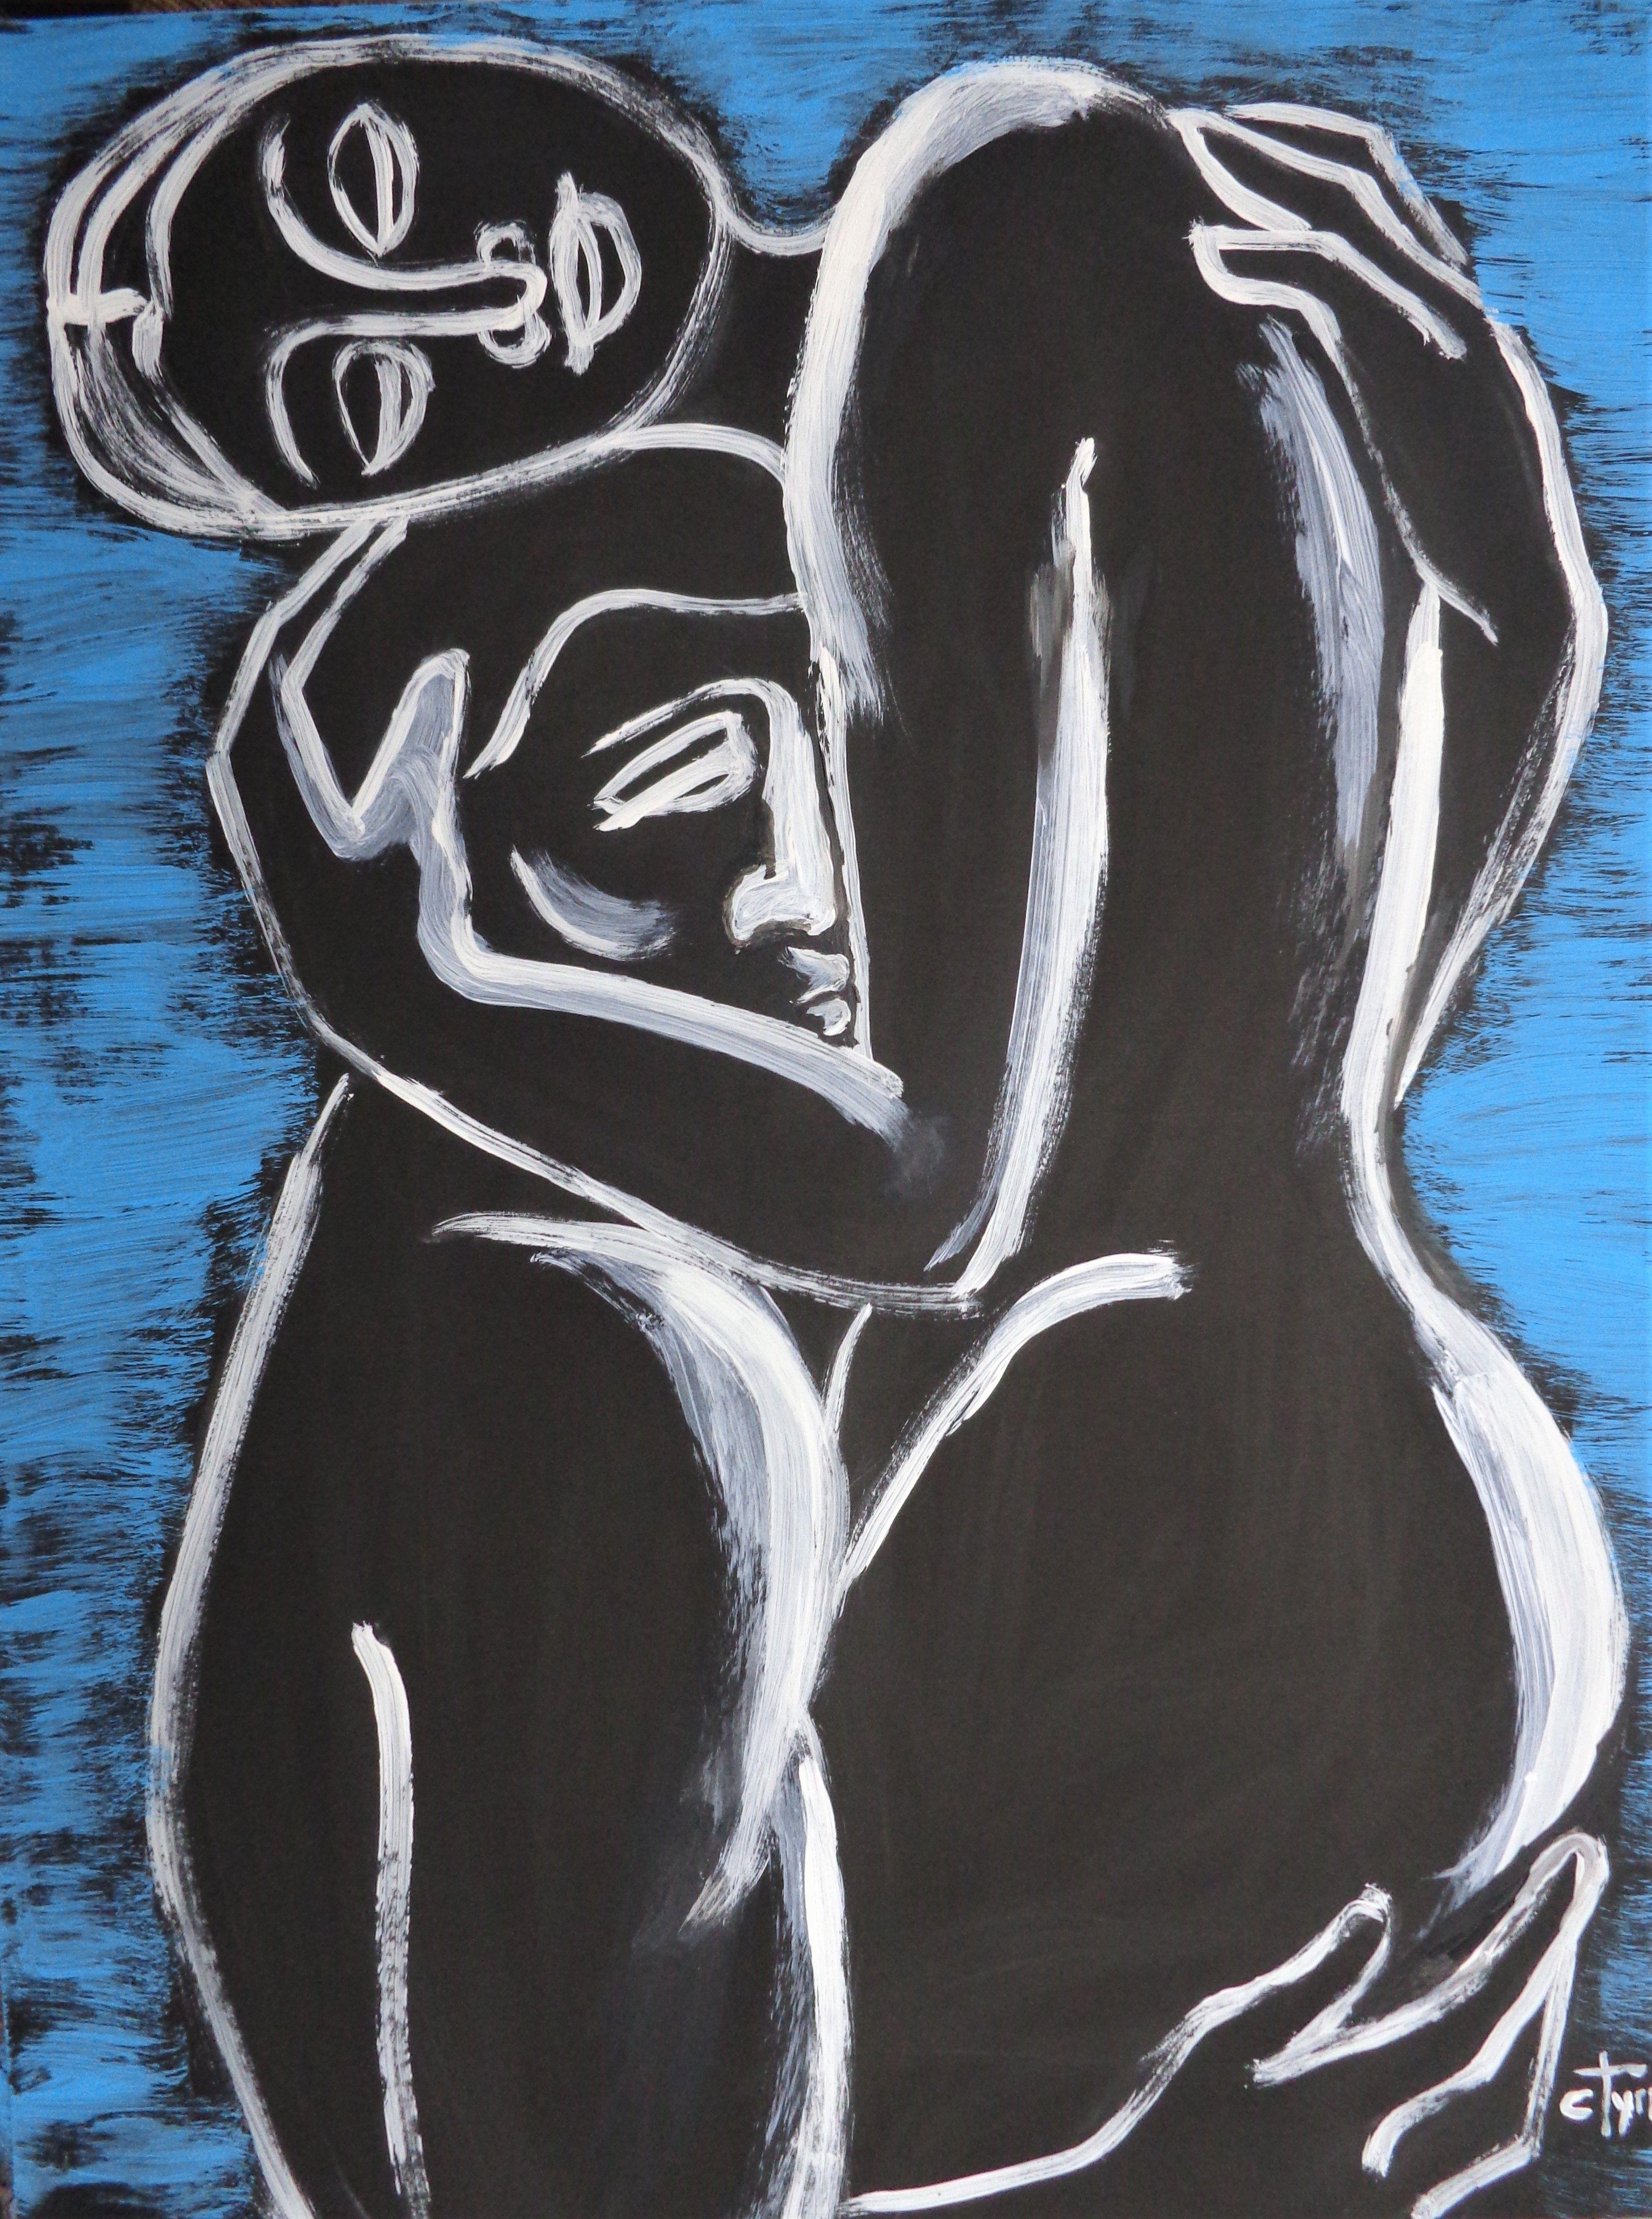 Original semi-abstract figurative painting on black cartridge, unframed. Spontaneous artwork made using blue and white acrylics. Emotional and sensual image of an embraced couple in love, part of a new series. Size 51 cm x 63 cm (20" x 25"). Quality